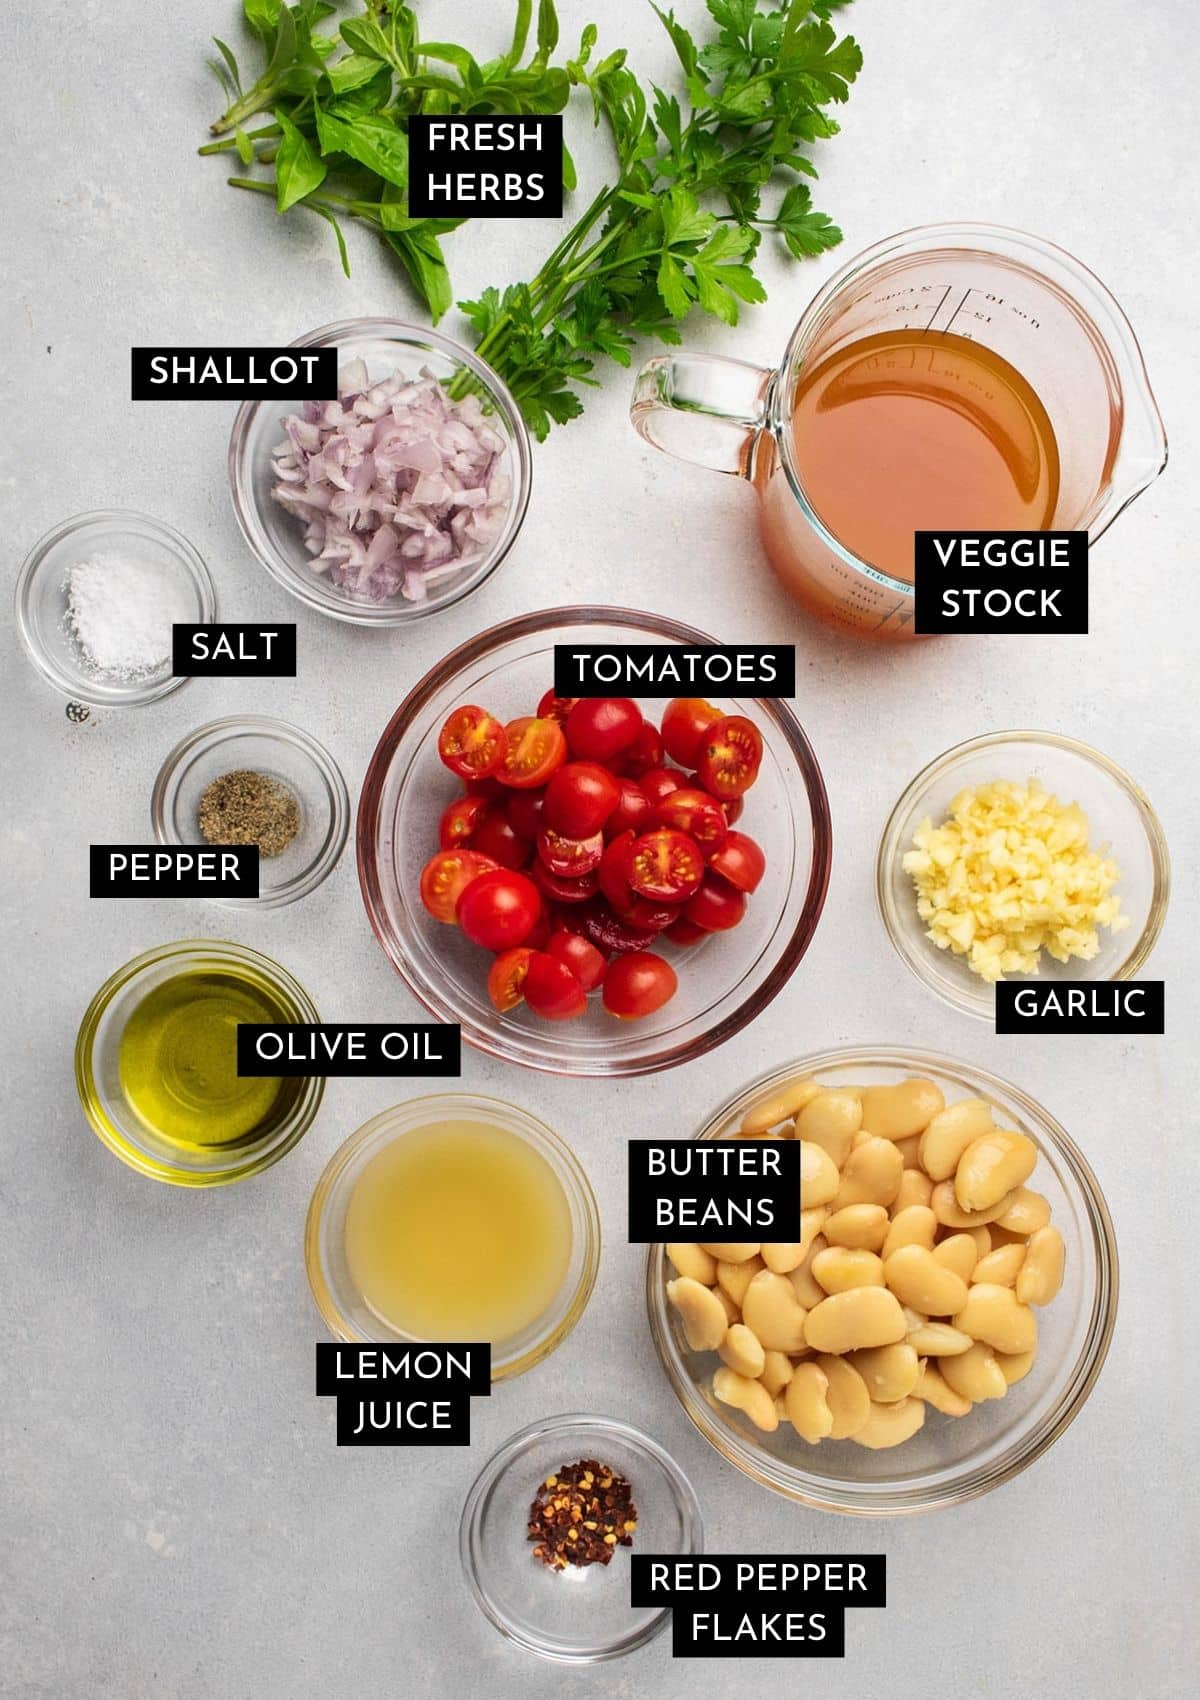 Recipe ingredients, organized into individual glass bowls on a white table.